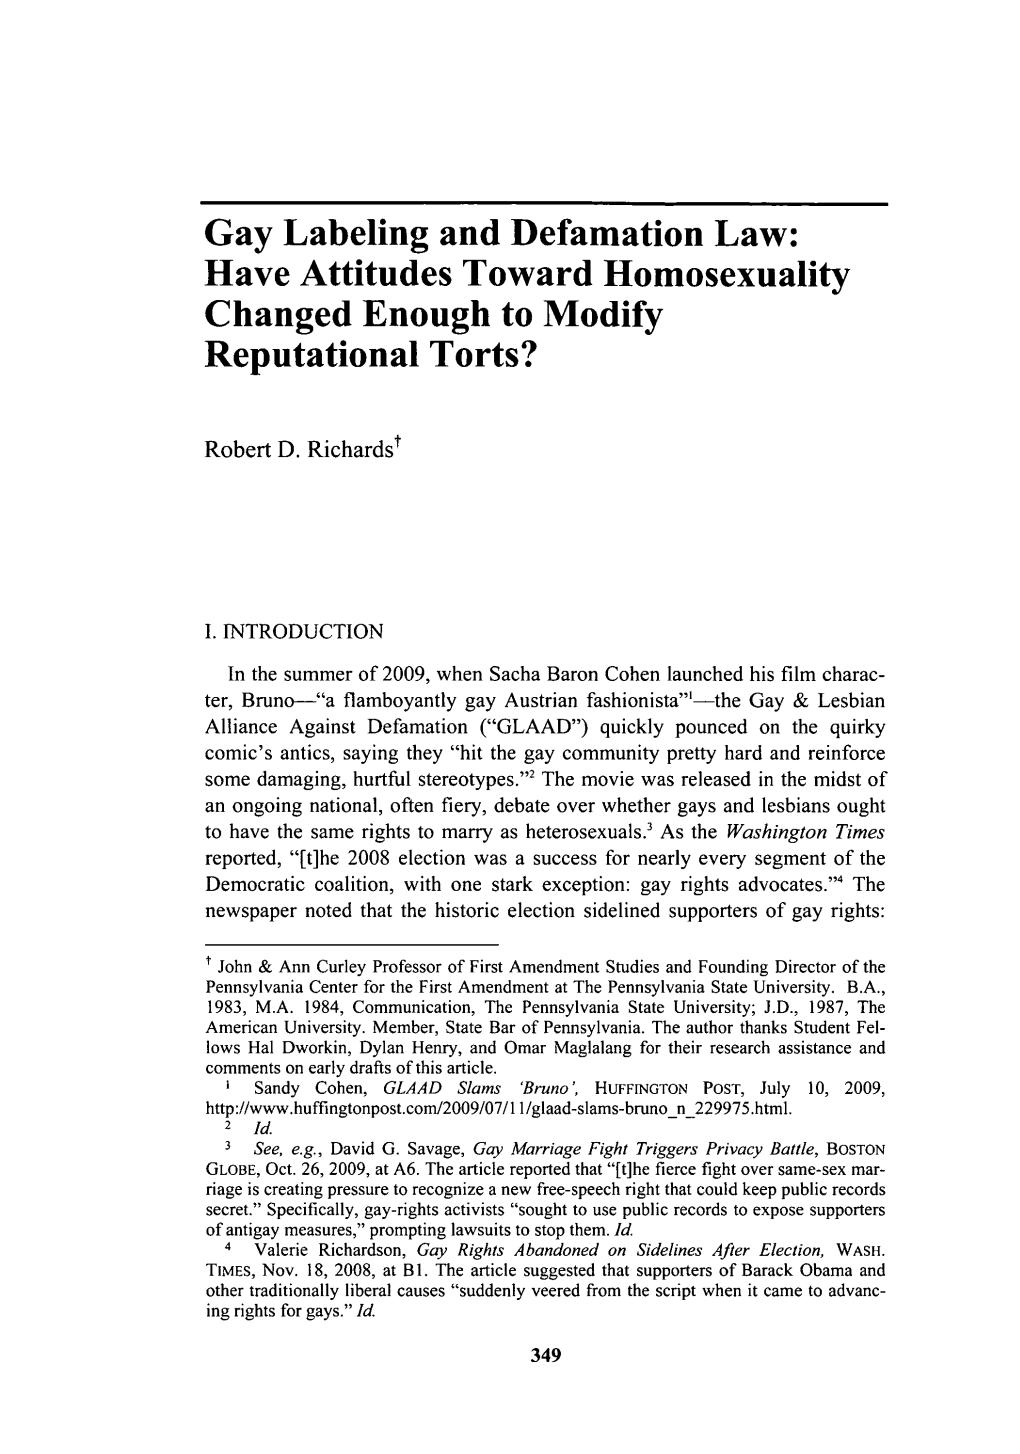 Gay Labeling and Defamation Law: Have Attitudes Toward Homosexuality Changed Enough to Modify Reputational Torts?